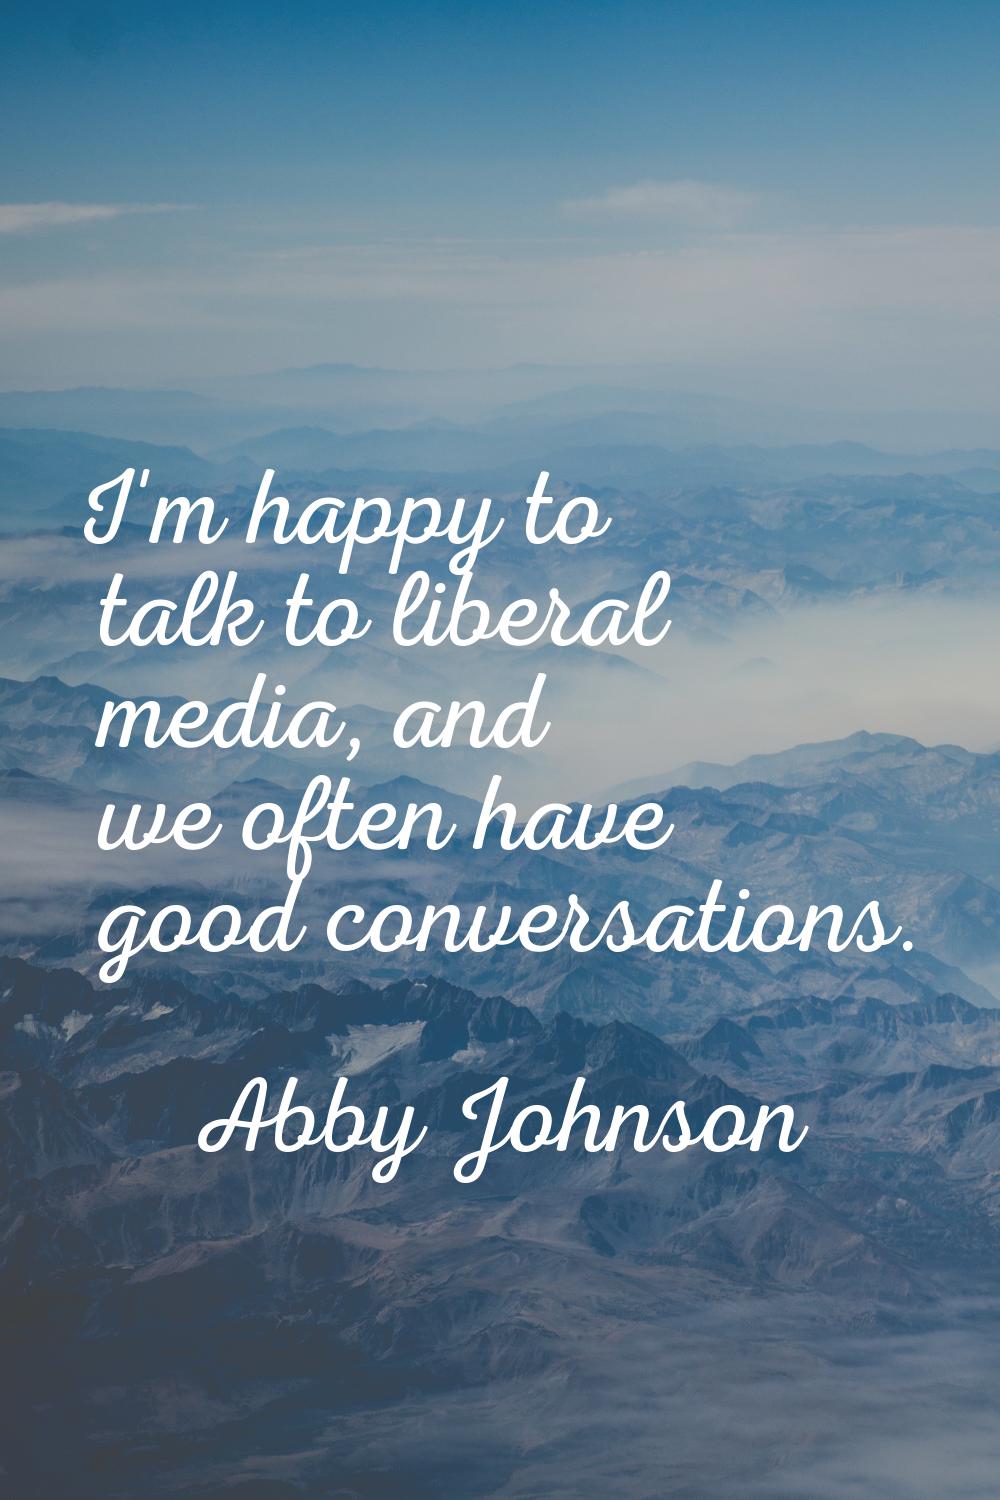 I'm happy to talk to liberal media, and we often have good conversations.